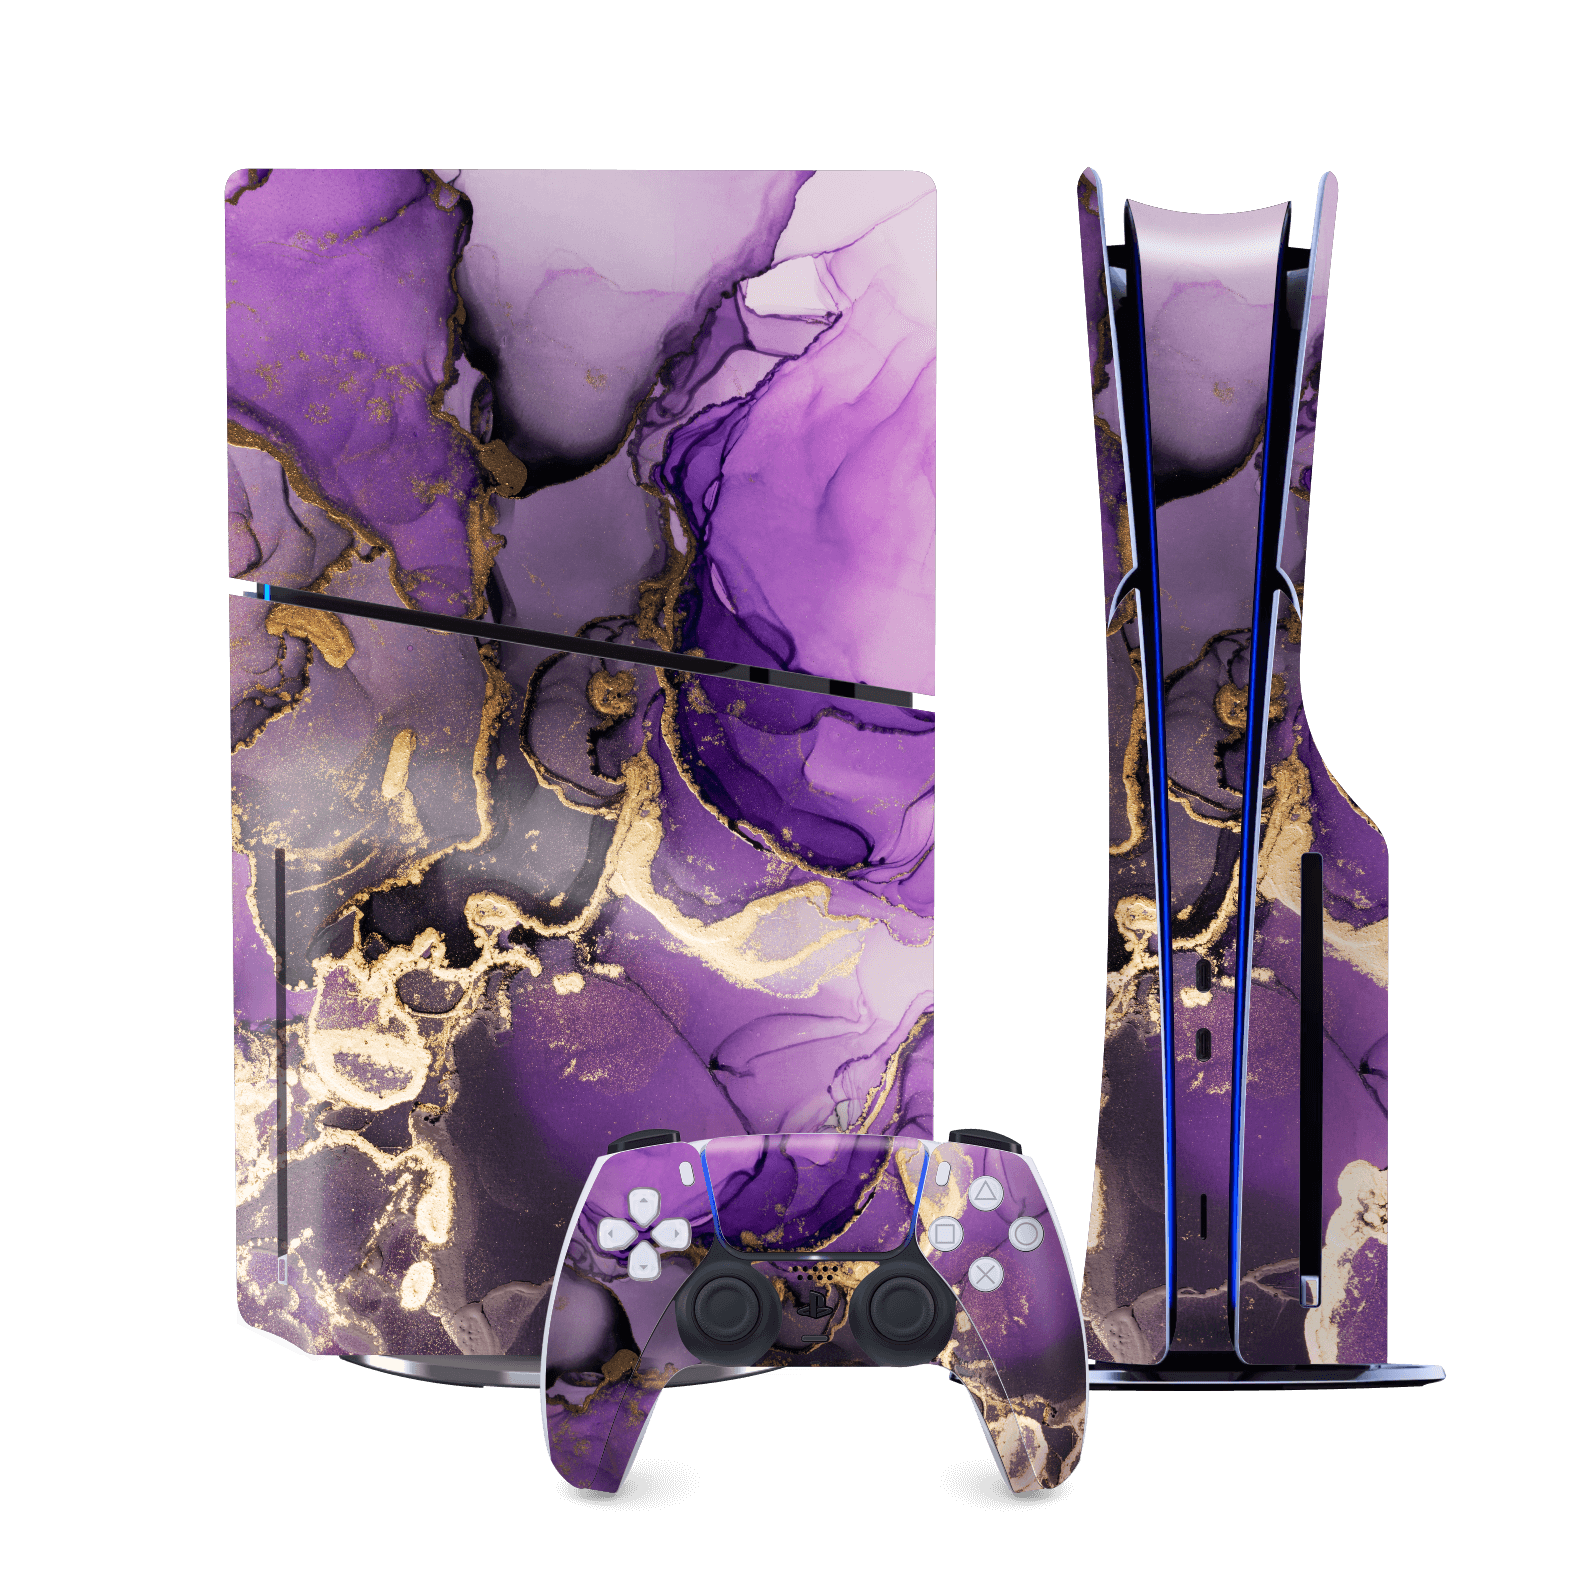 PS5 SLIM DISC EDITION (PlayStation 5 SLIM) Print Printed Custom SIGNATURE AGATE GEODE Purple-Gold Skin Wrap Sticker Decal Cover Protector by QSKINZ | qskinz.com